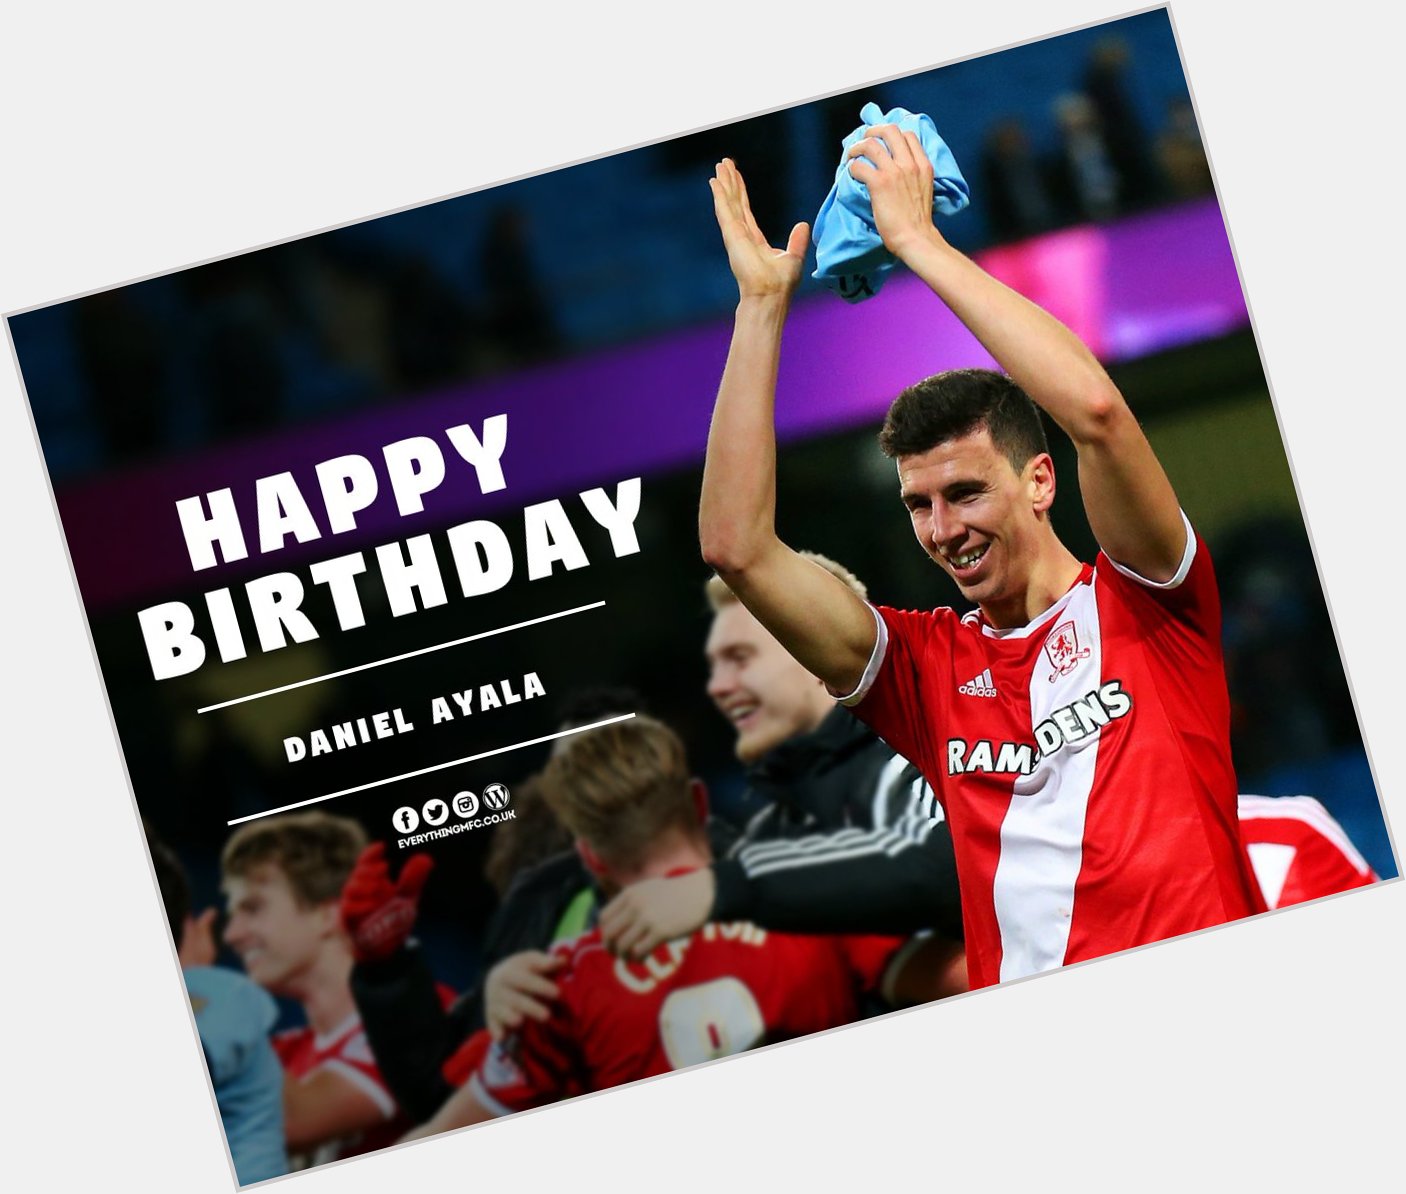 A big happy birthday to the colossus that is Daniel Ayala! 